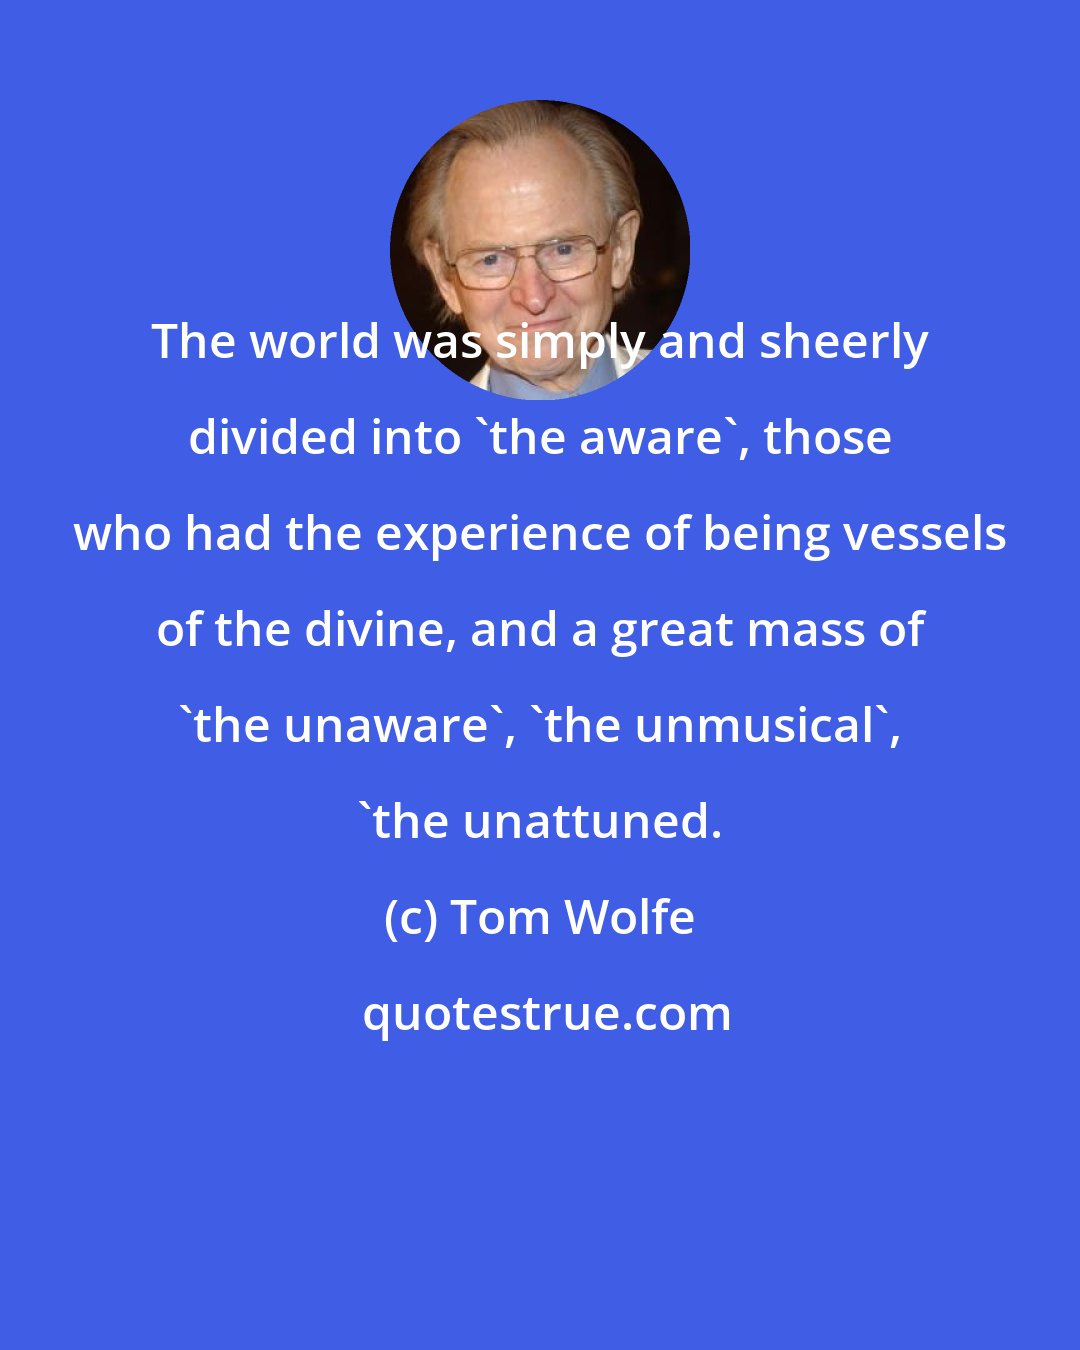 Tom Wolfe: The world was simply and sheerly divided into 'the aware', those who had the experience of being vessels of the divine, and a great mass of 'the unaware', 'the unmusical', 'the unattuned.